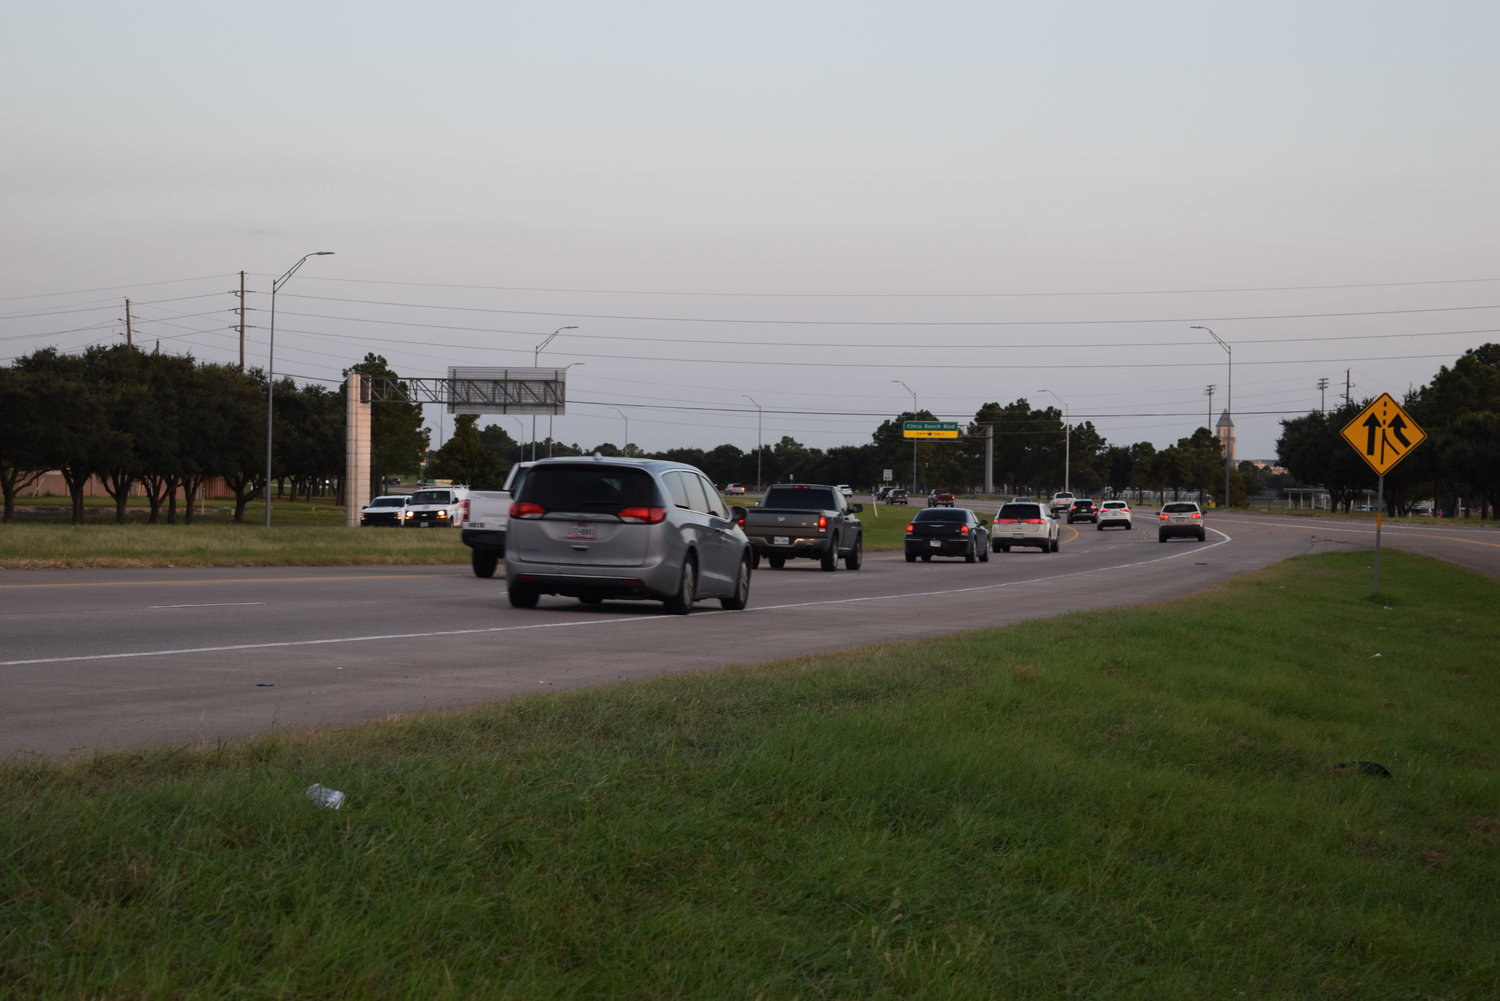 Backups of traffic on the Grand Parkway between I-10 and FM 1093 during rush hour may be mitigated in the next few years as the Texas Department of Transportation adds one lane in each direction and other improvements in order to mitigate traffic. Additionally, Fort Bend County officials are working to improve the access roads on the southern portion of the parkway.